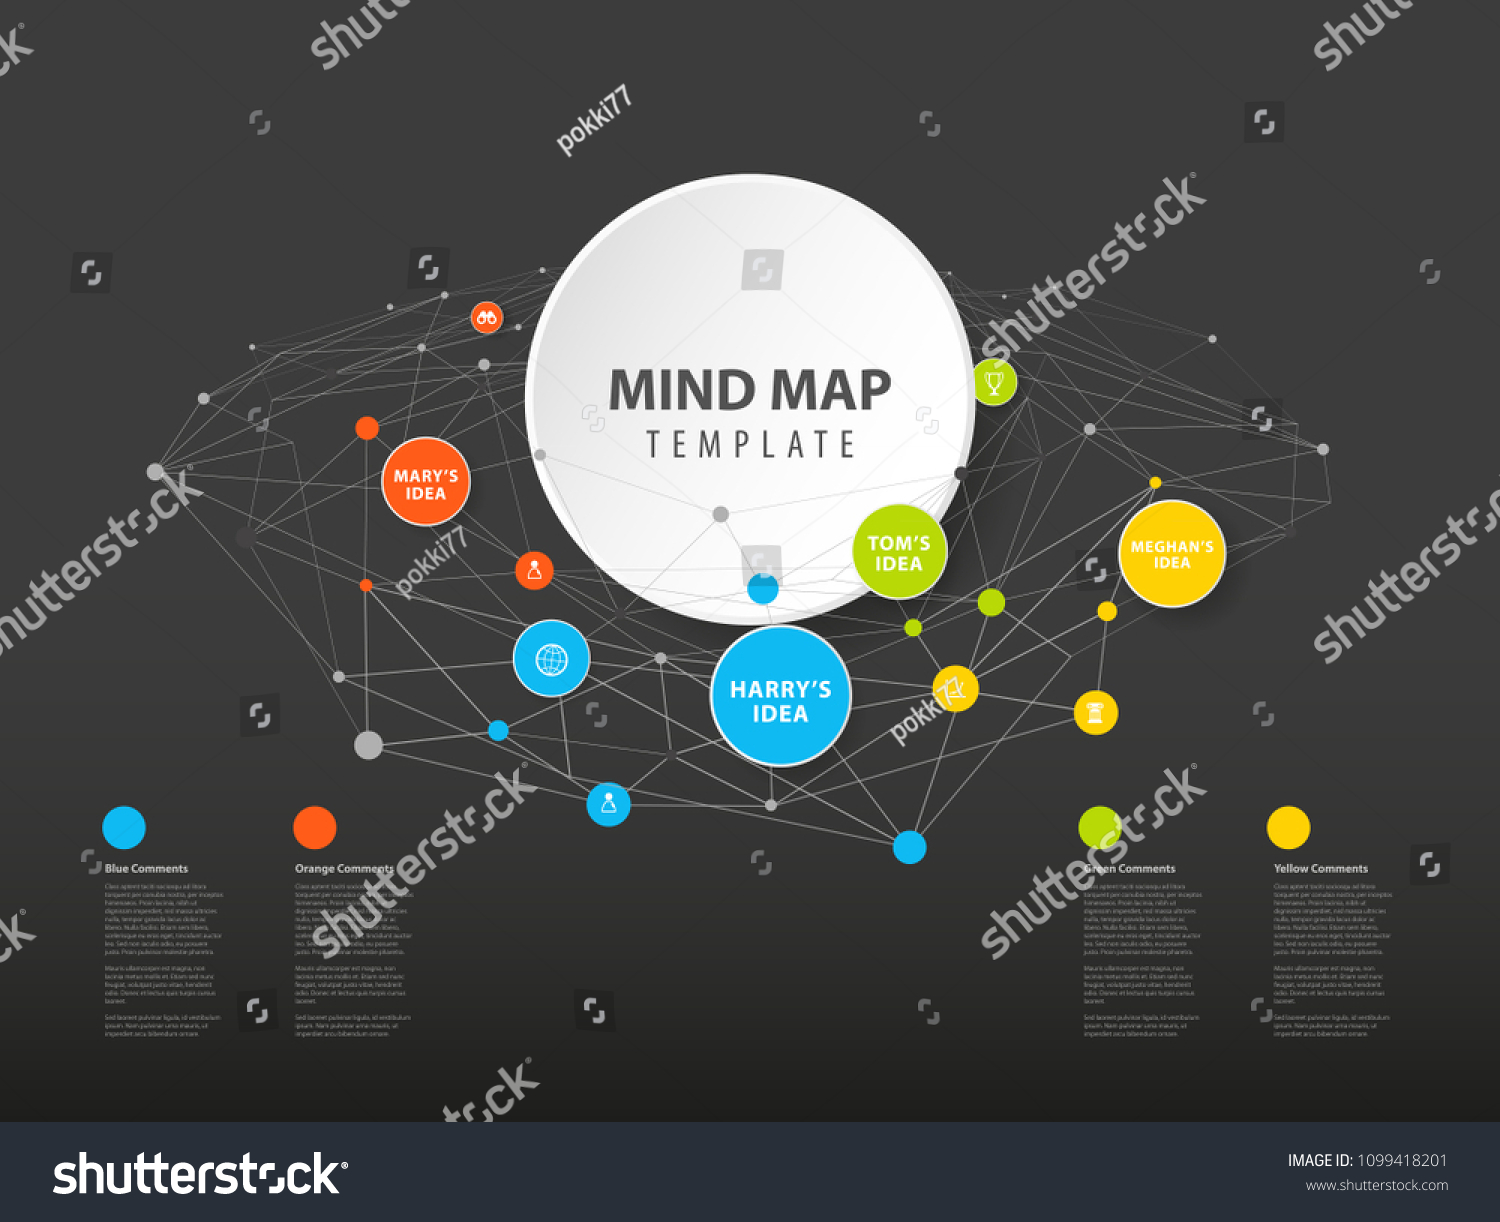 Vector Mind Map Template Colorful Circles Stock Vector Royalty Free 1099418201